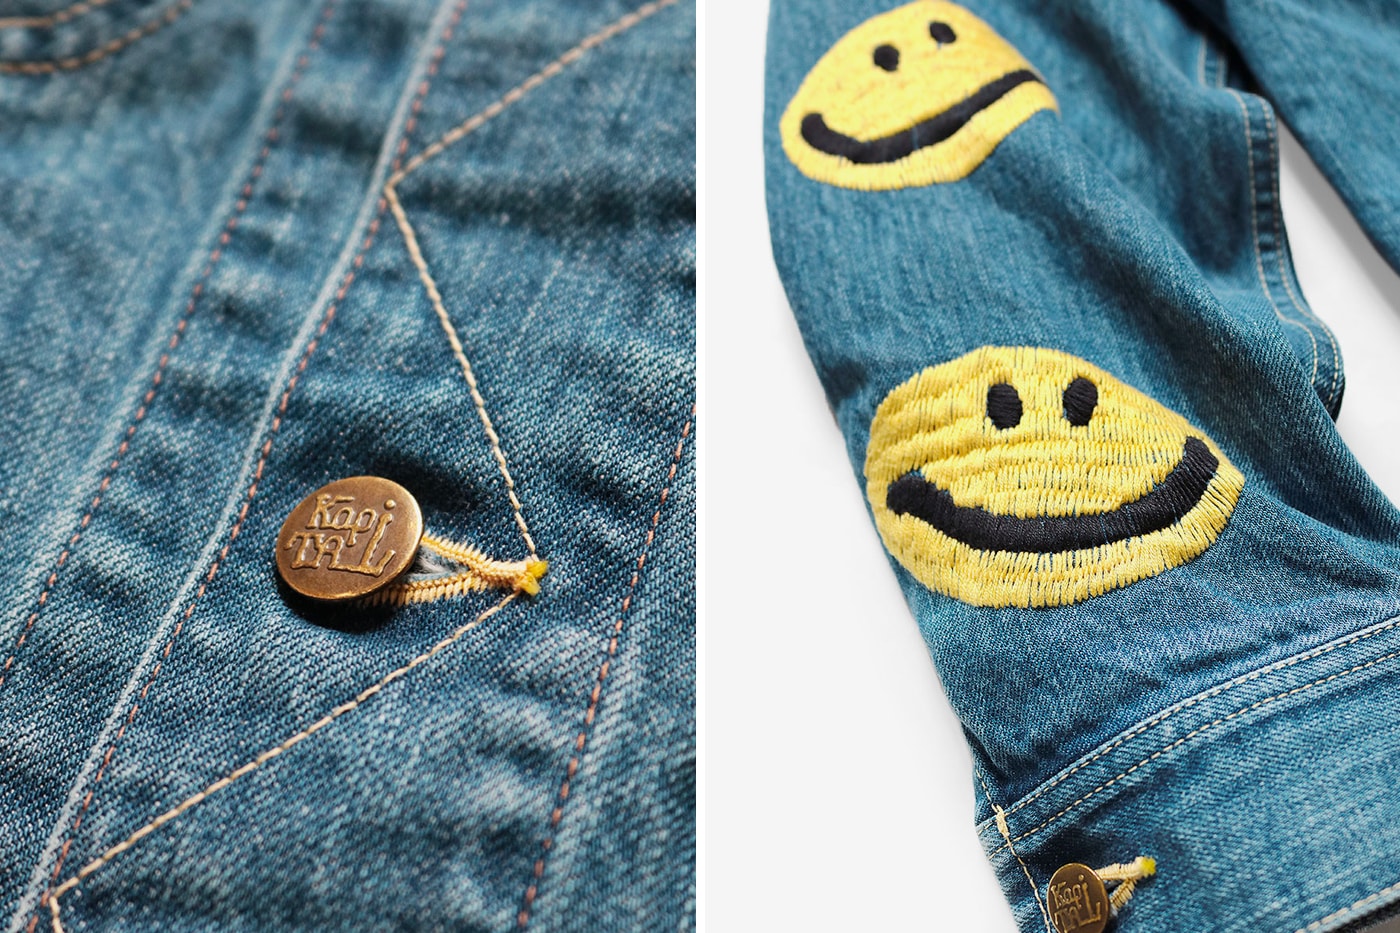 KAPITAL 14oz Denim Smile Embroidery Westerner Jacket jean indigo yellow brass buttons japanese classic retro vintage trucker americana Fall Winter 2019 Collection layers elongated